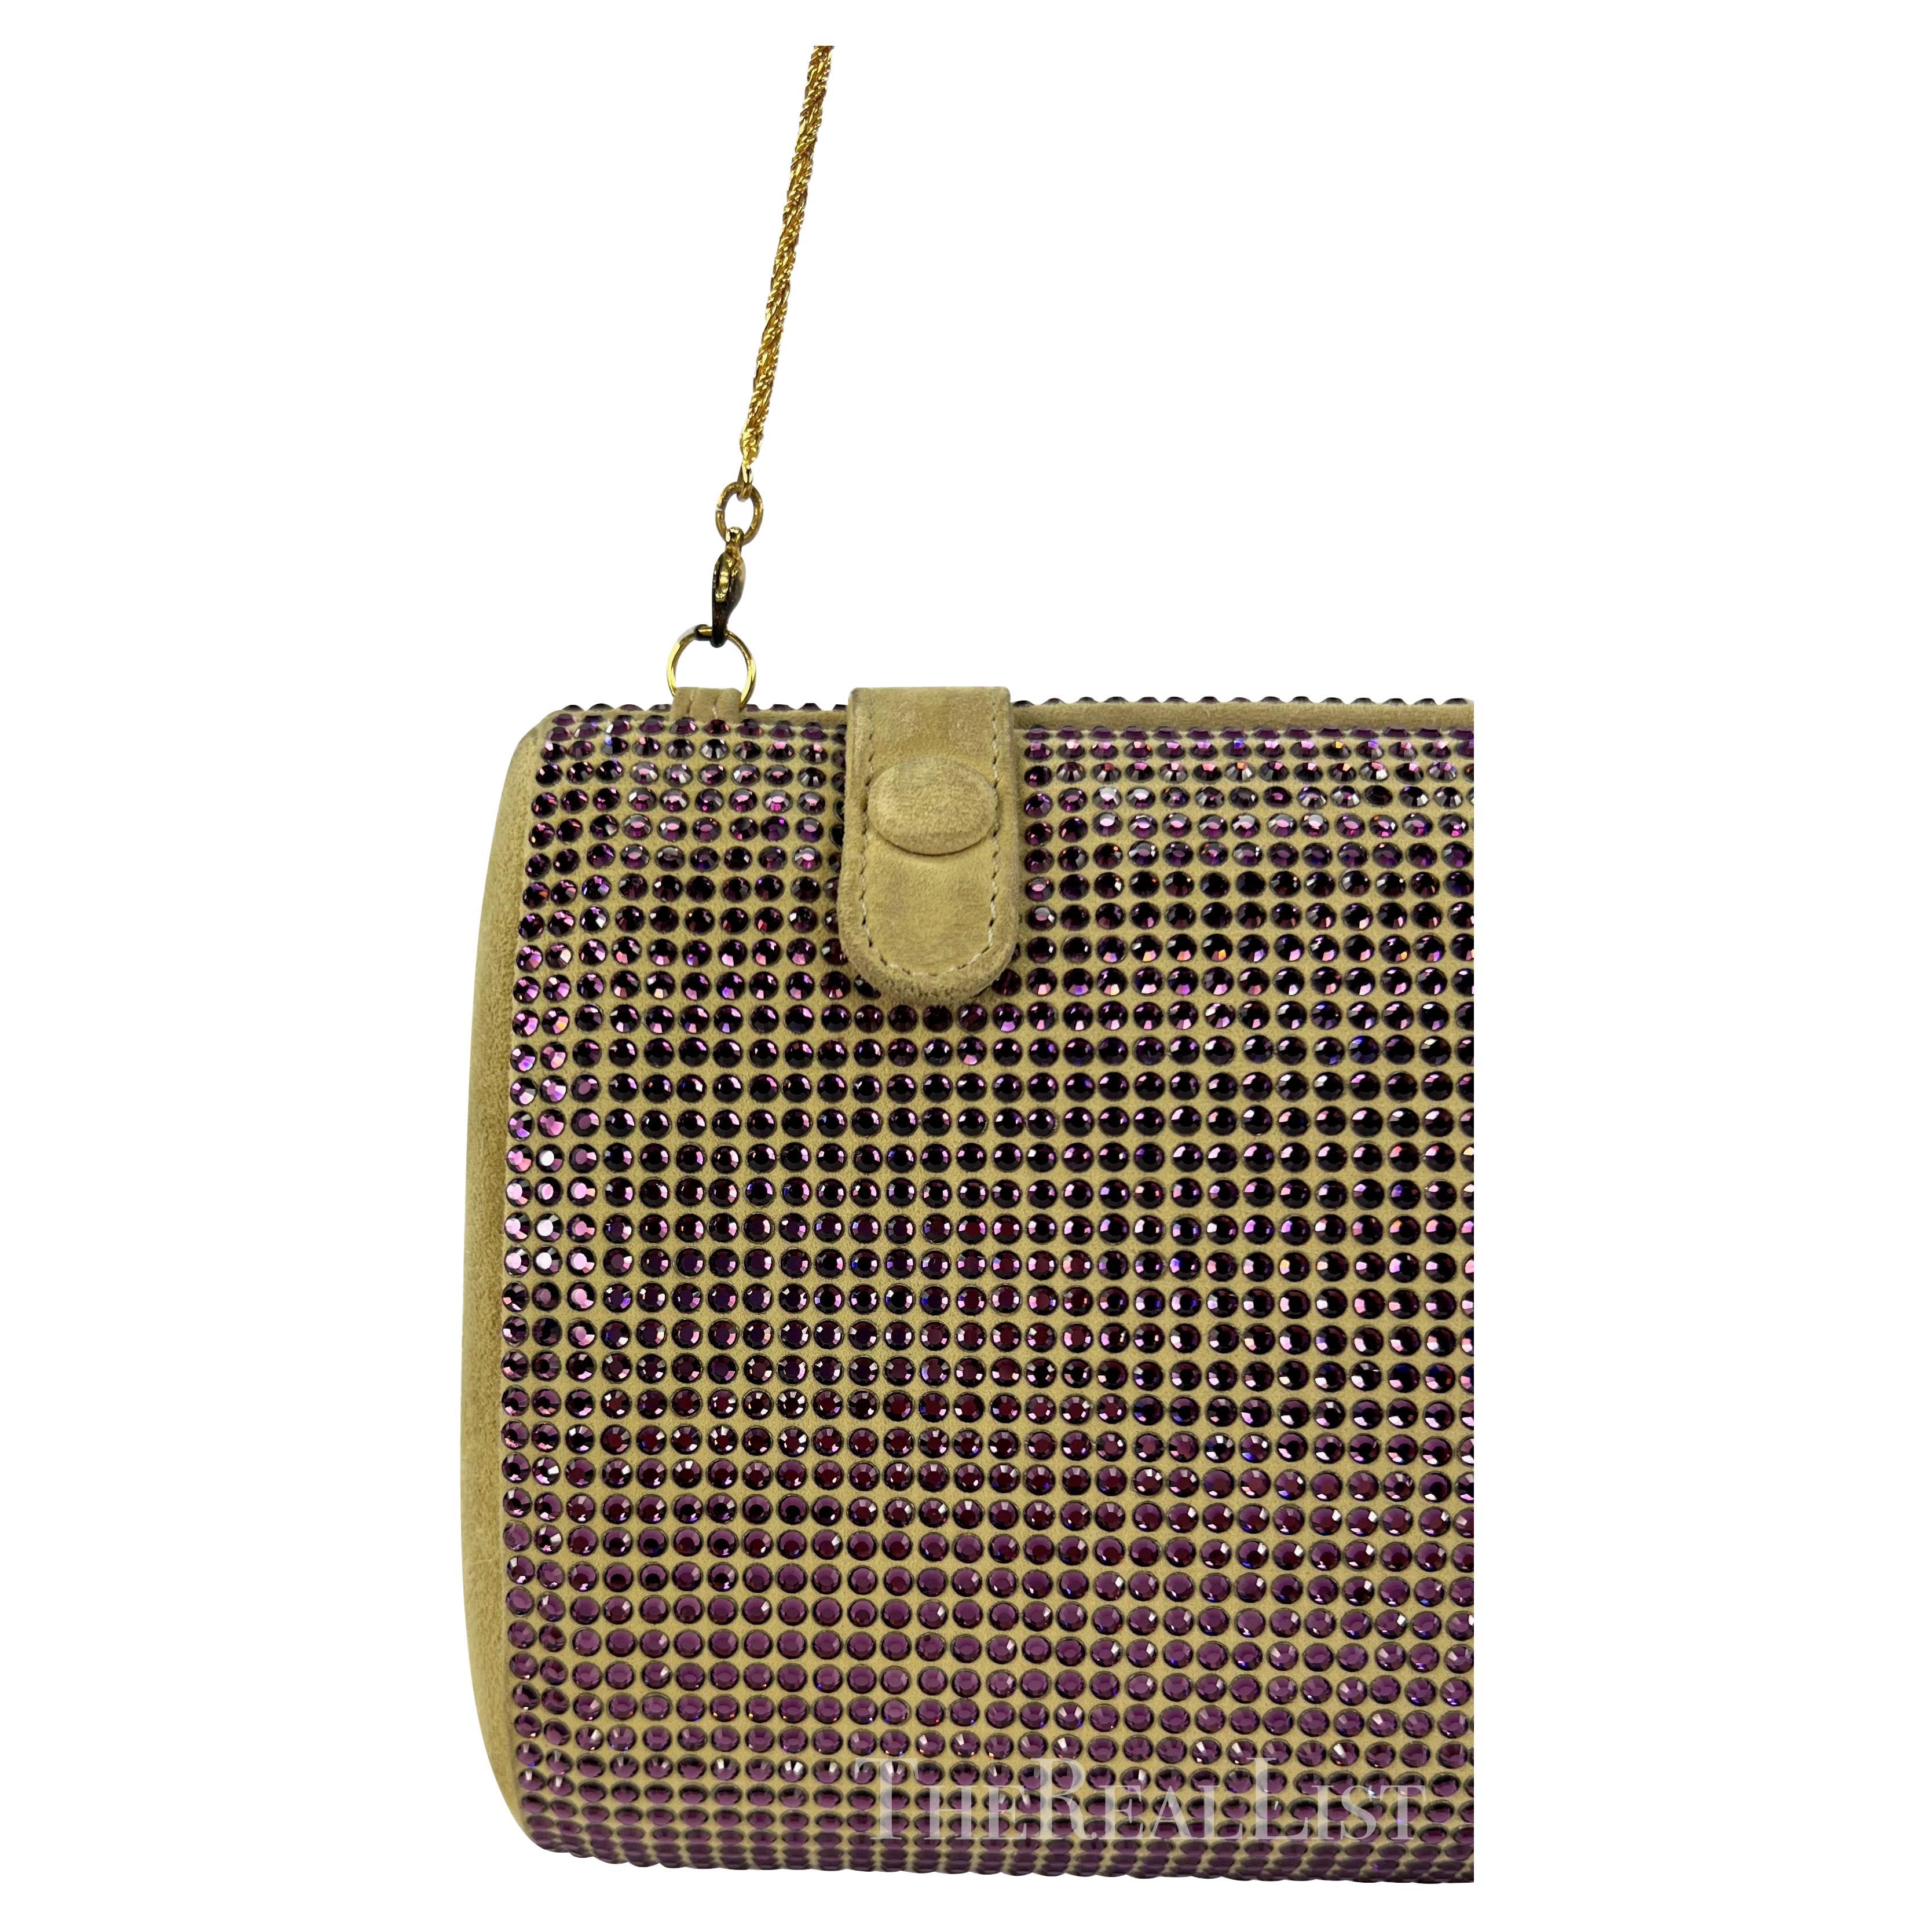 S/S 2000 Gianni Versace by Donatella Runway Purple Rhinestone Convertible Clutch In Good Condition For Sale In West Hollywood, CA